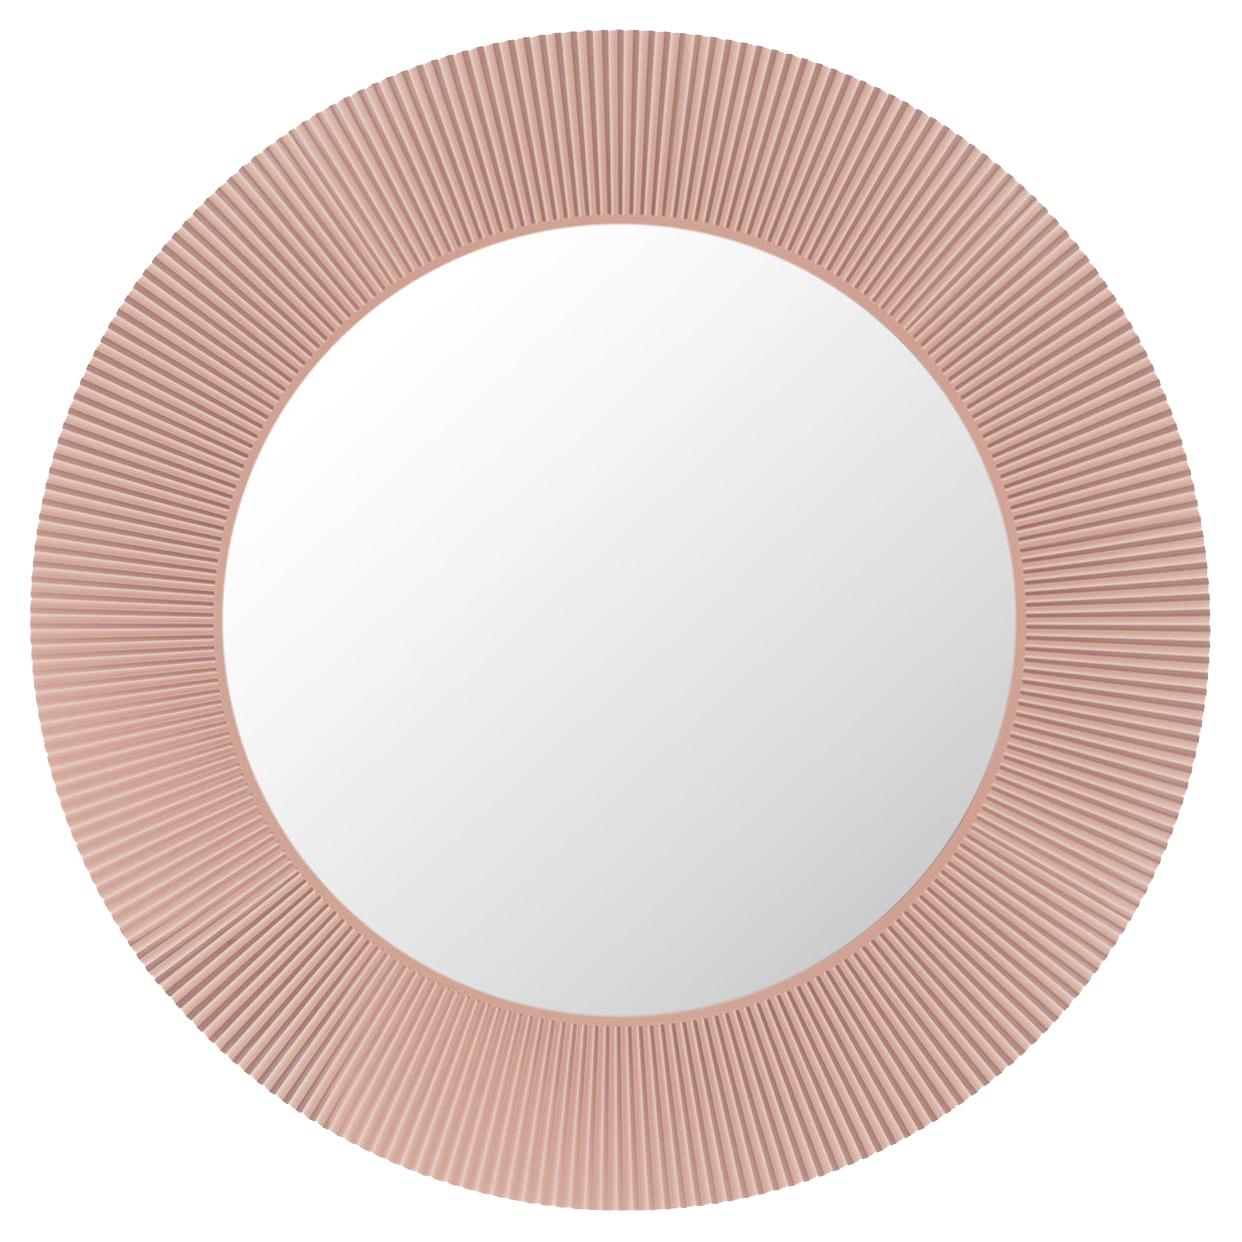 Kartell All Saints Mirror in Copper by Ludovica and Roberto Palomba For Sale